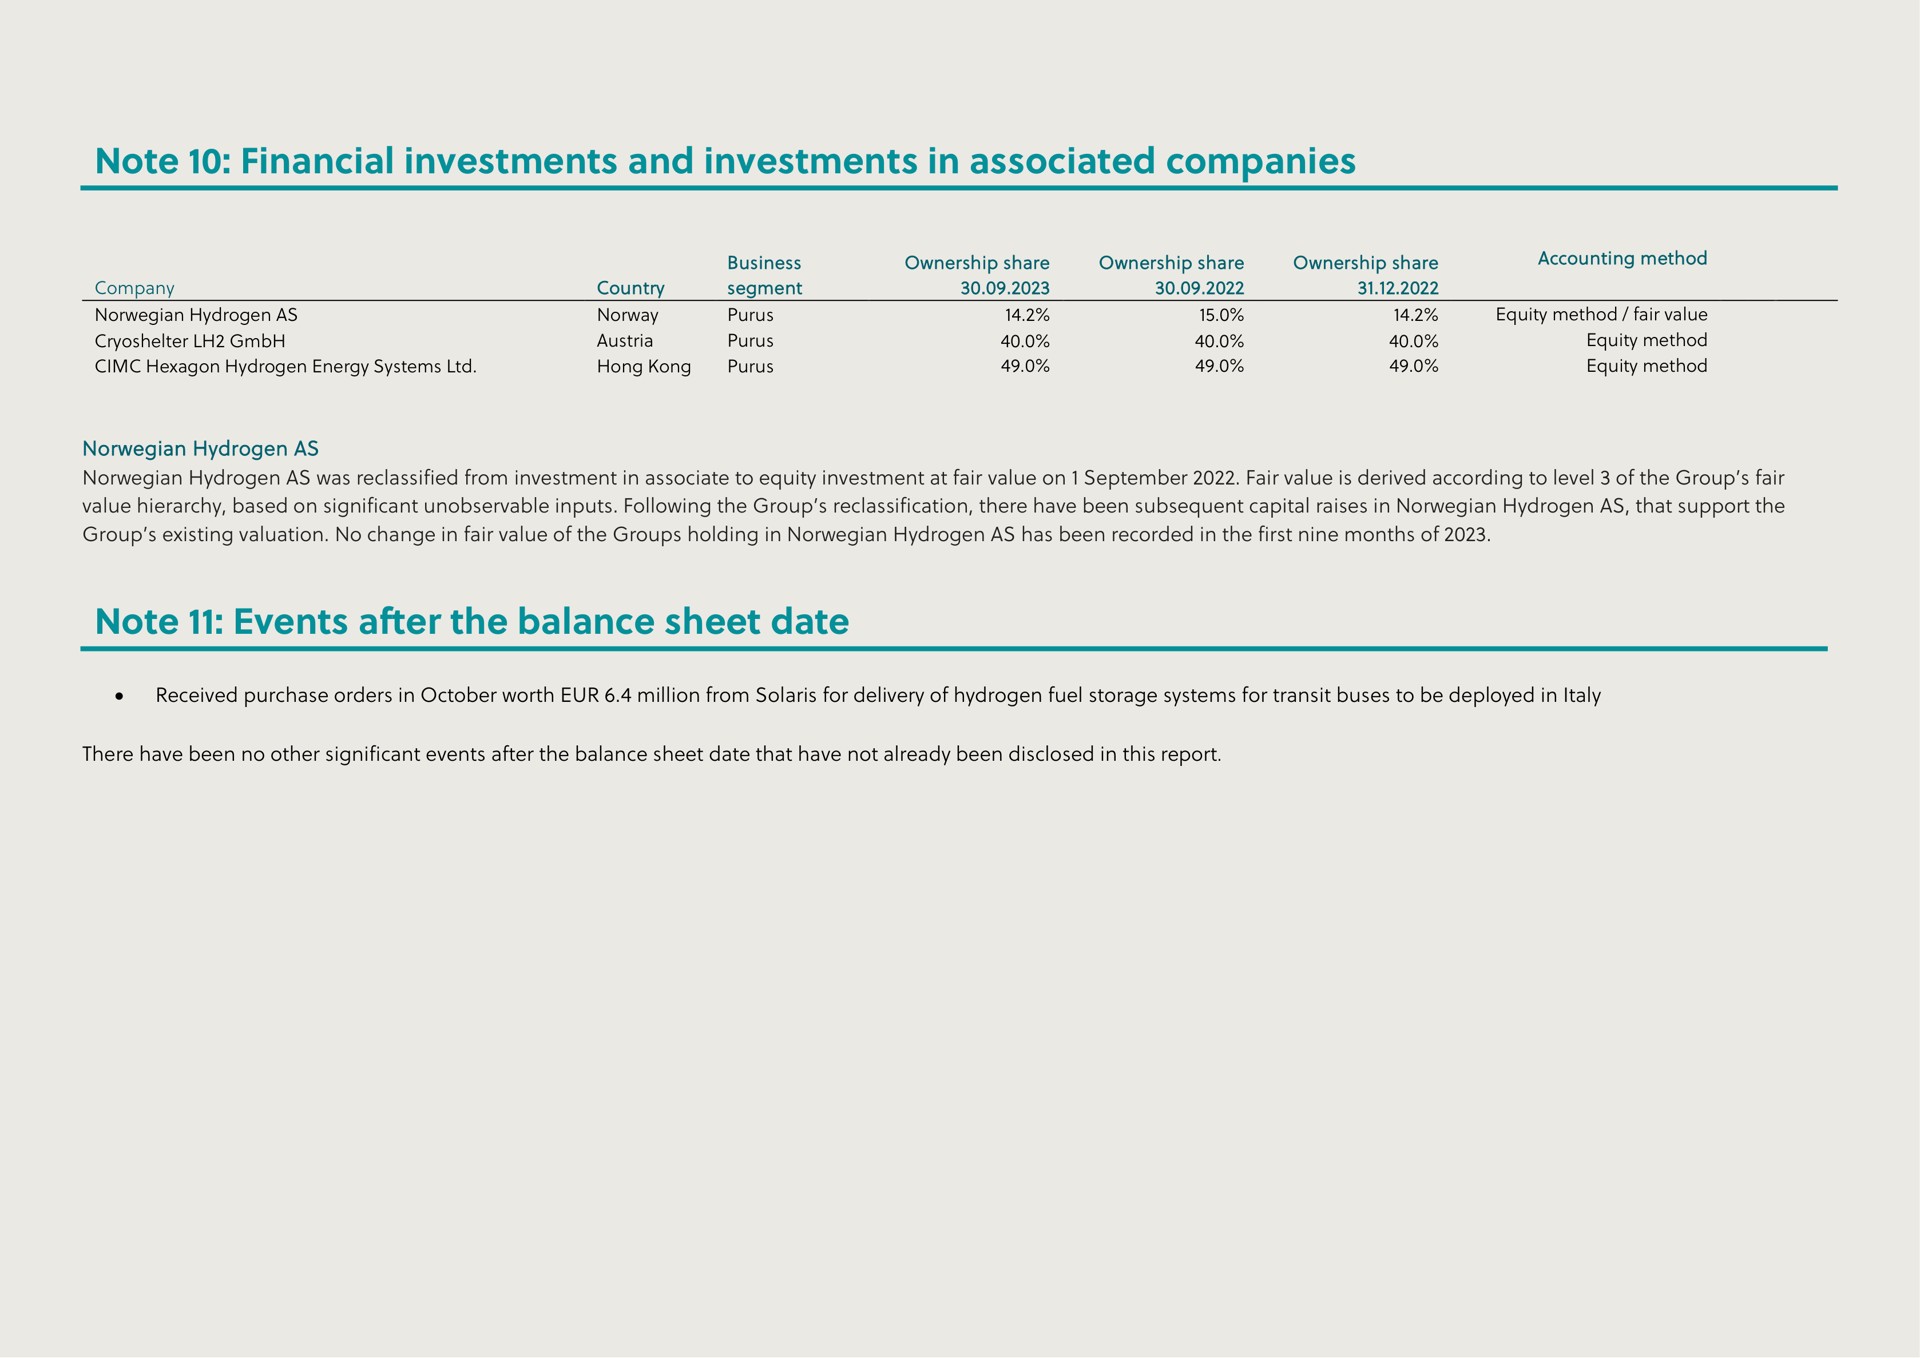 note financial investments and investments in associated companies note events after the balance sheet date | Hexagon Purus